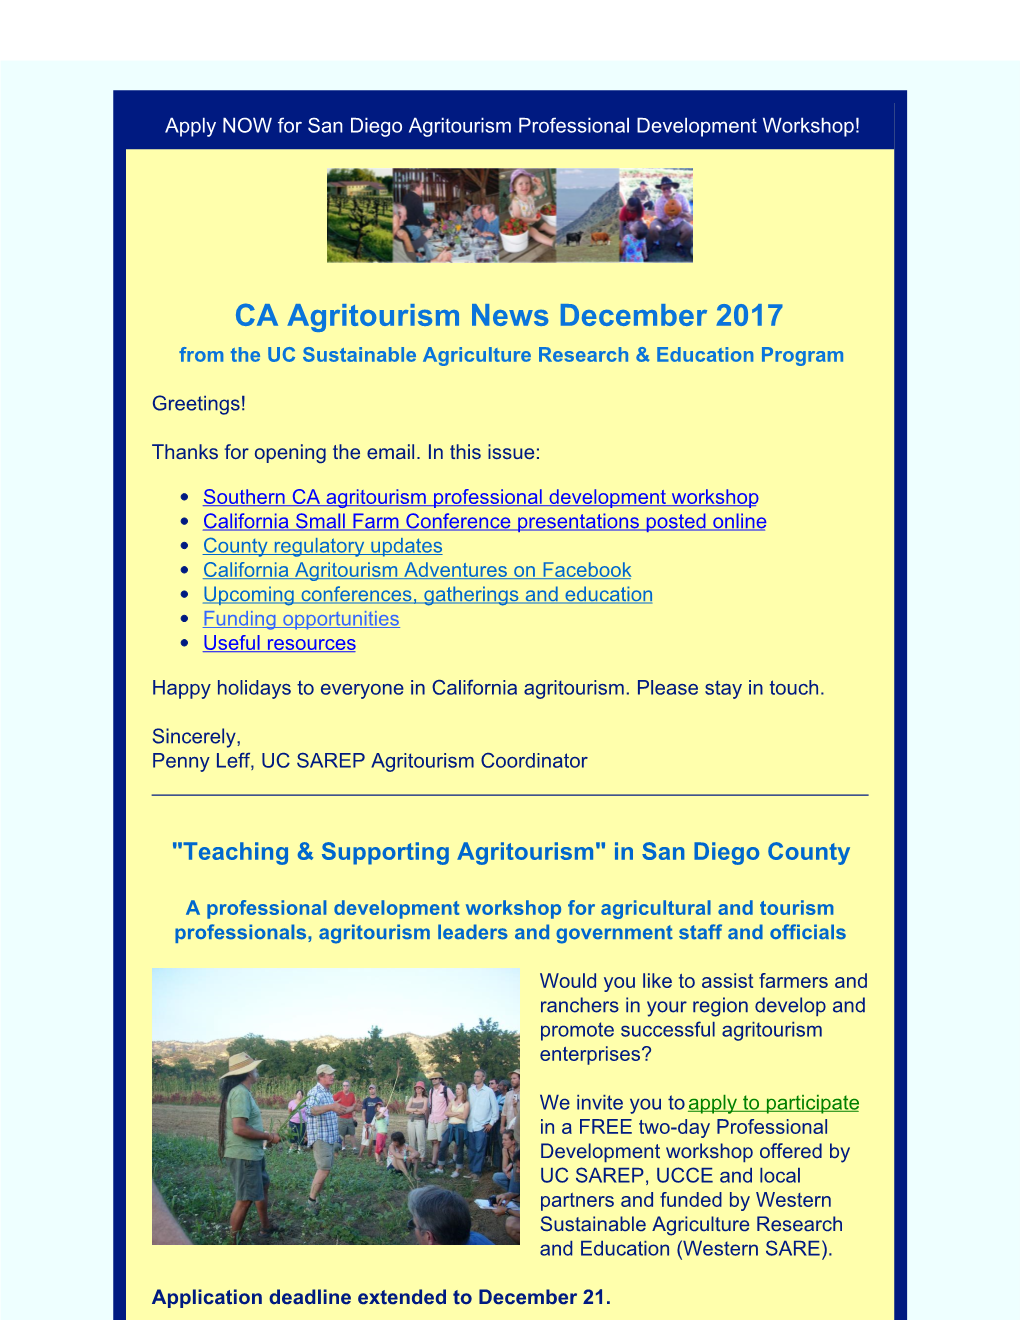 CA Agritourism News December 2017 from the UC Sustainable Agriculture Research & Education Program